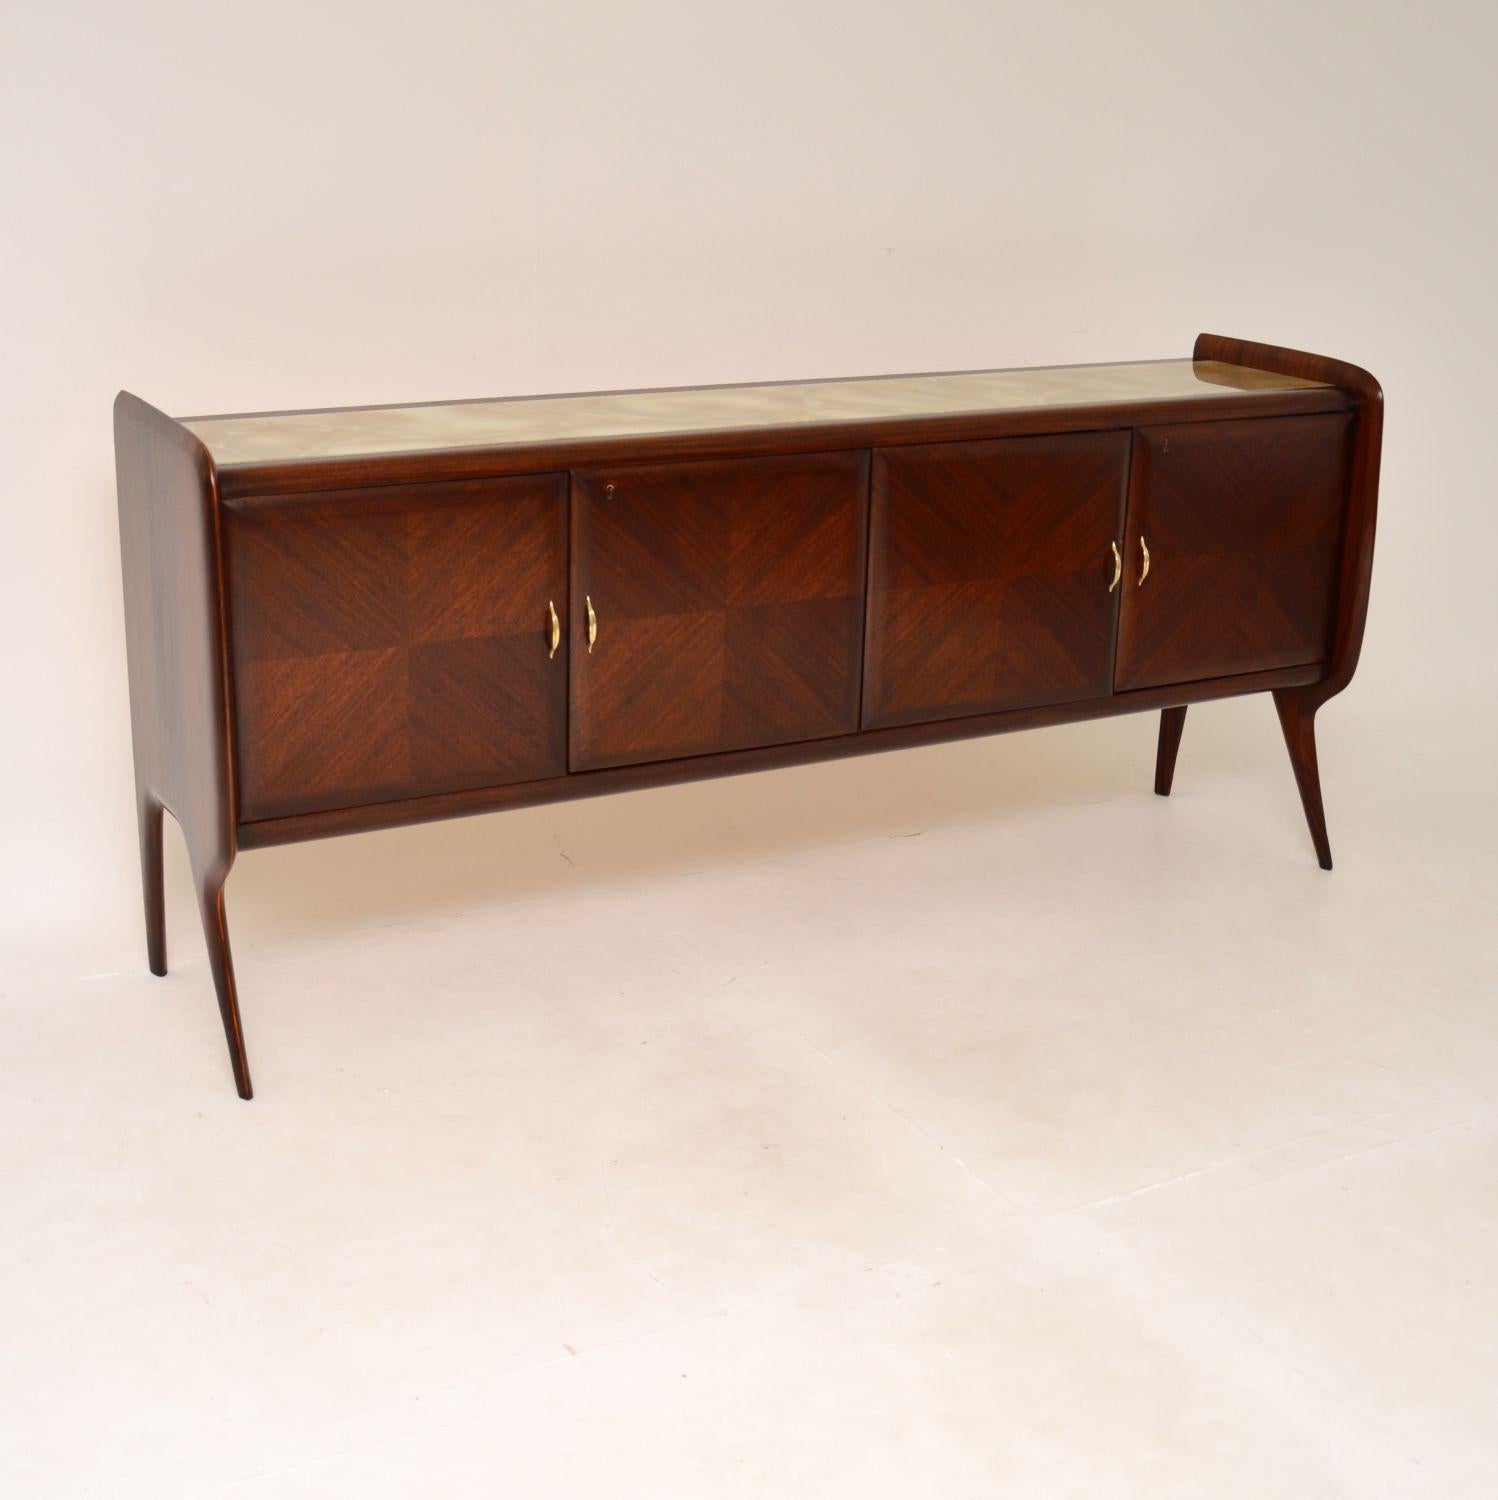 A very stylish and impressive vintage Italian sideboard in the manner of Gio Ponti. This was made in Italy and dates from the 1950-1960’s.

It has a gorgeous design, very sleek and is of excellent quality. The sides and legs are beautifully moulded